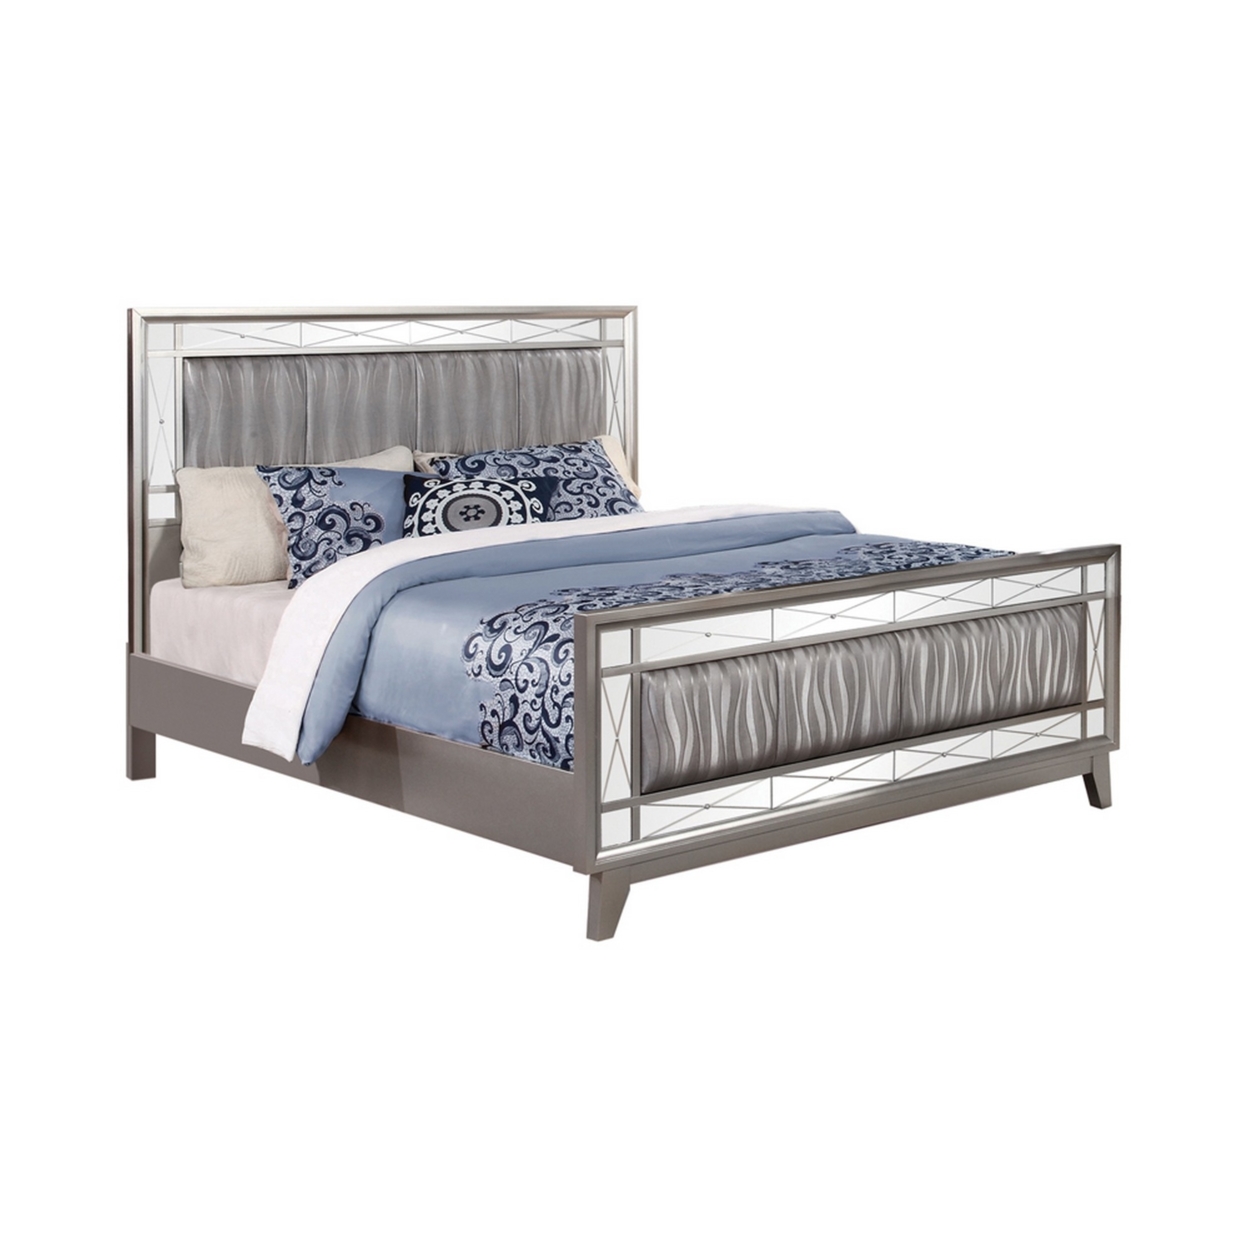 Leatherette Padded Eastern King Size Bed With Mirror Panel Accents, Gray- Saltoro Sherpi